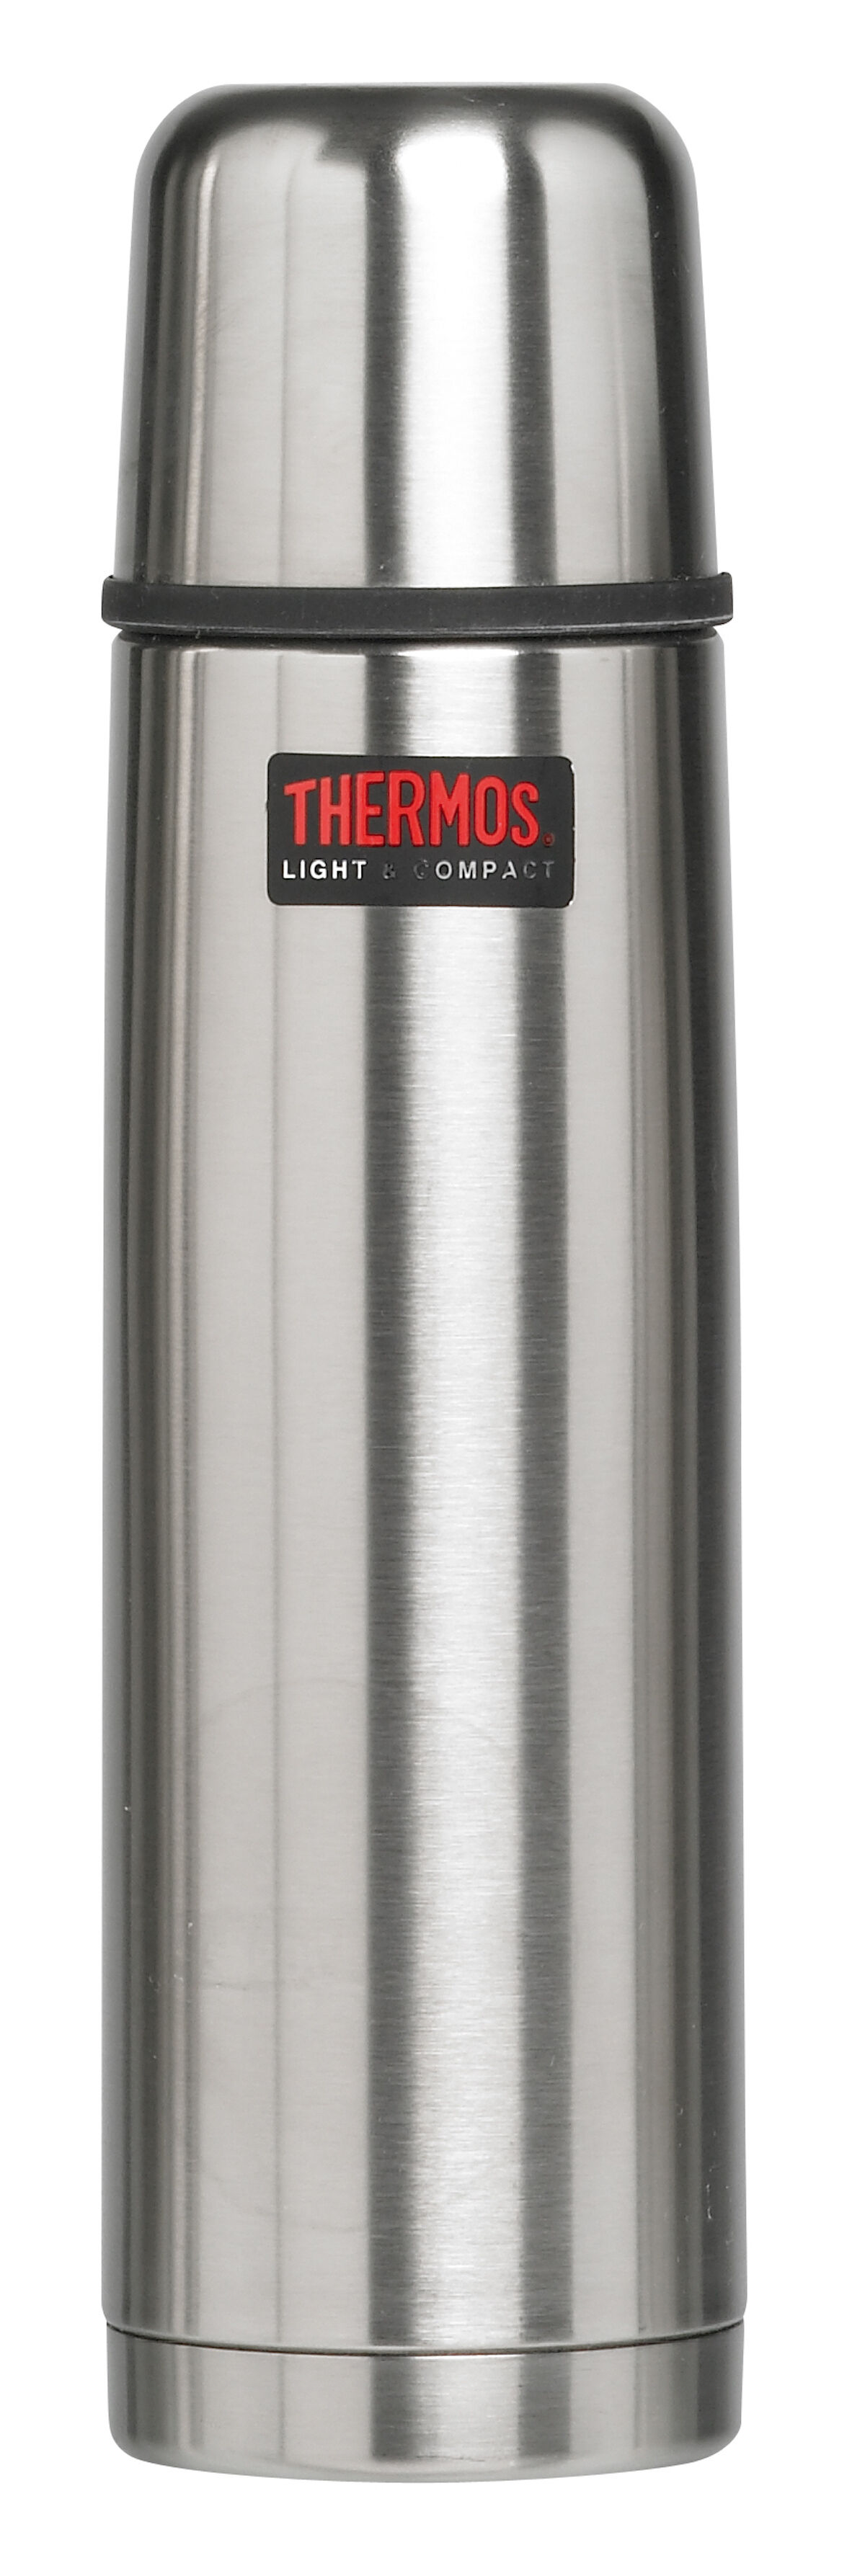 Thermos Light & Compact 75 cl - Thermosflasche